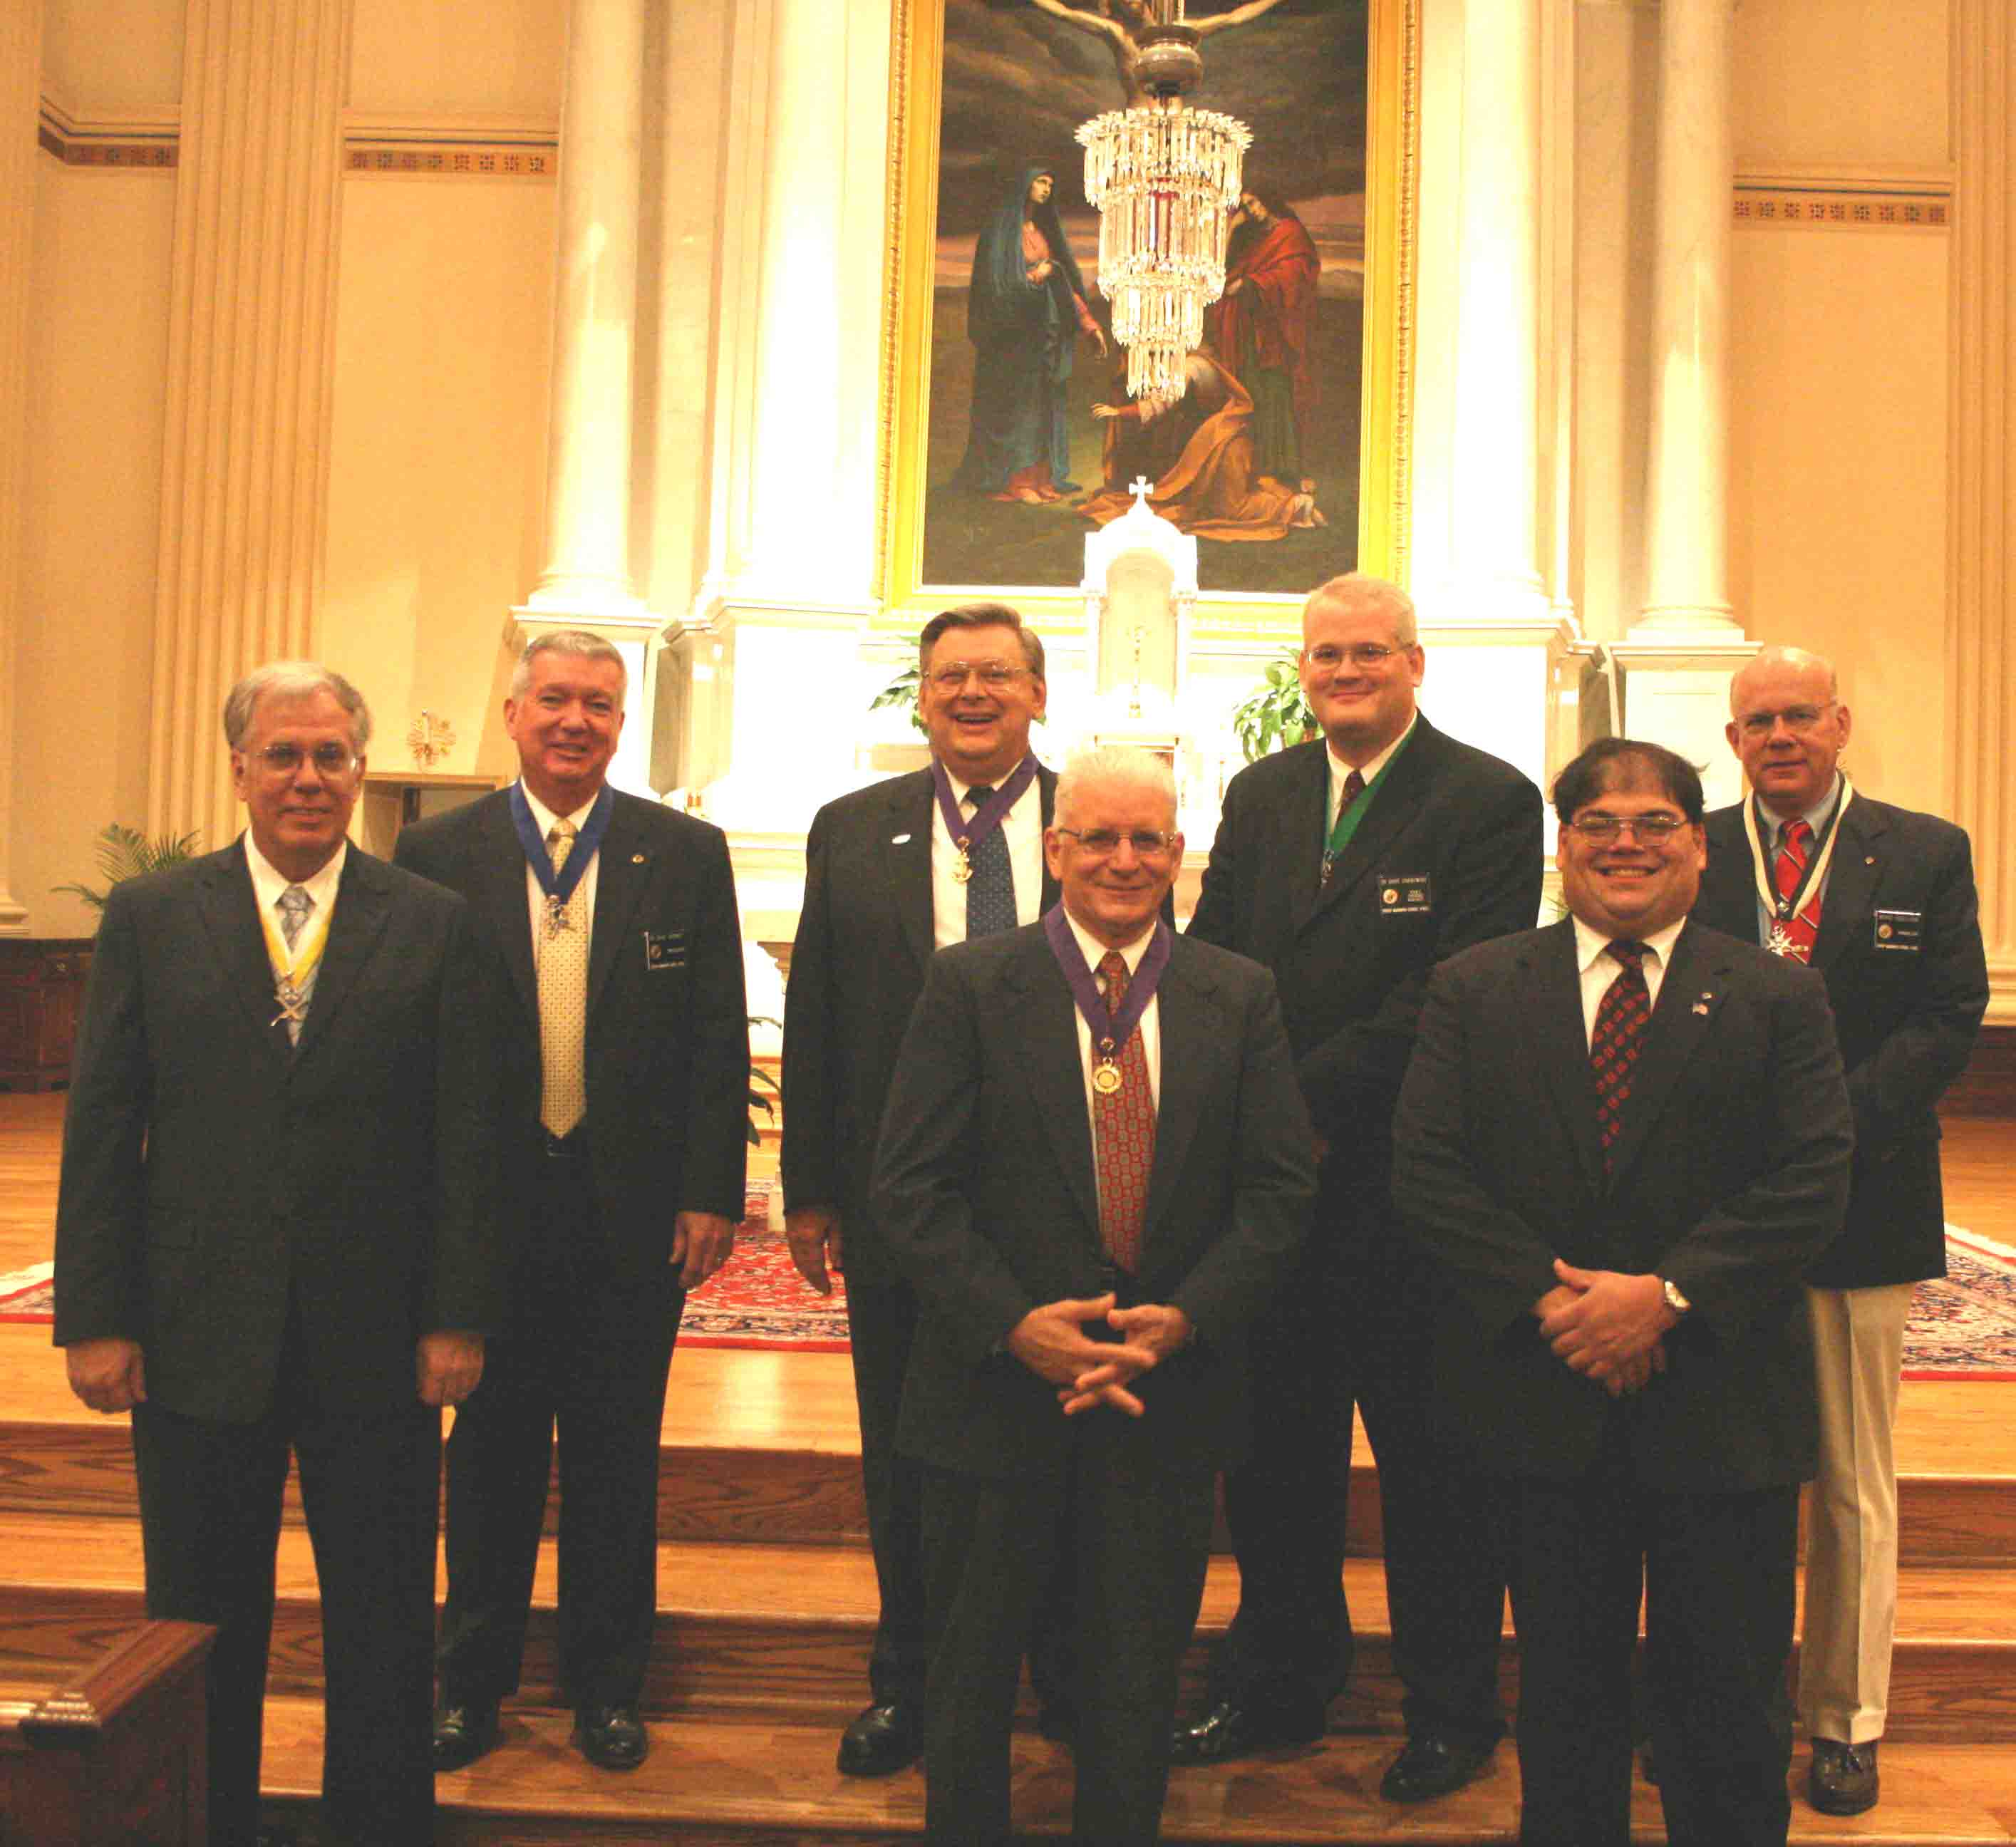 KofCCncl 1622 Officers 2007-2008 Fraternal Year